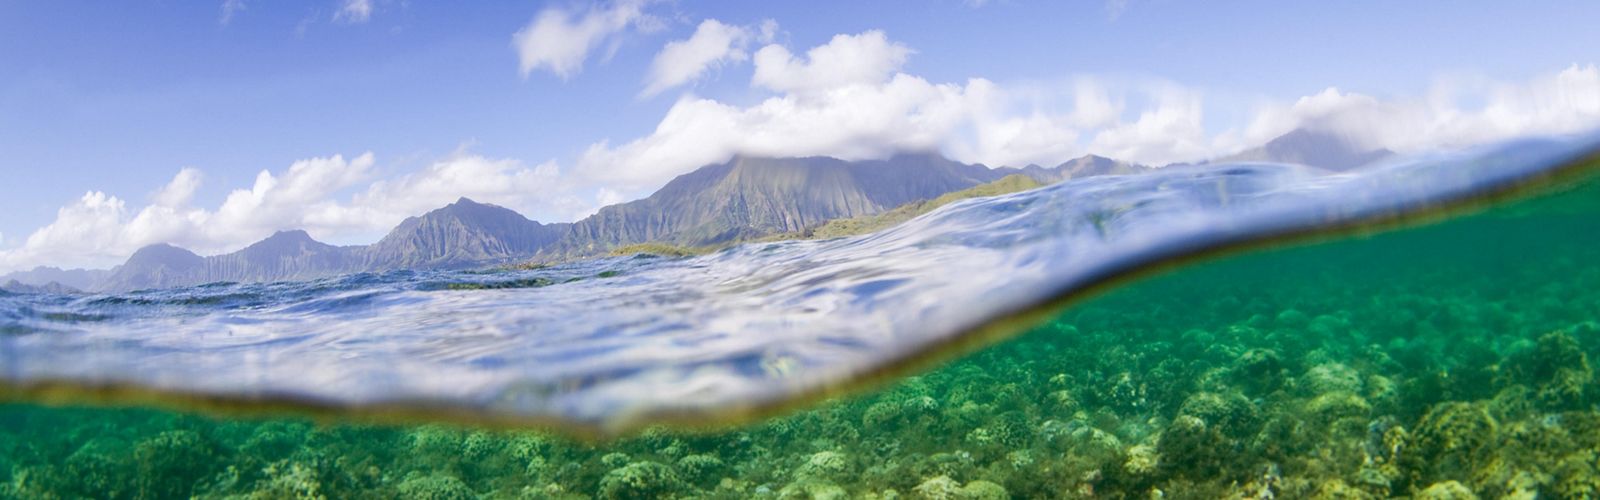 Split view above and under water showing a coral reef underwater and mountains in the distance.